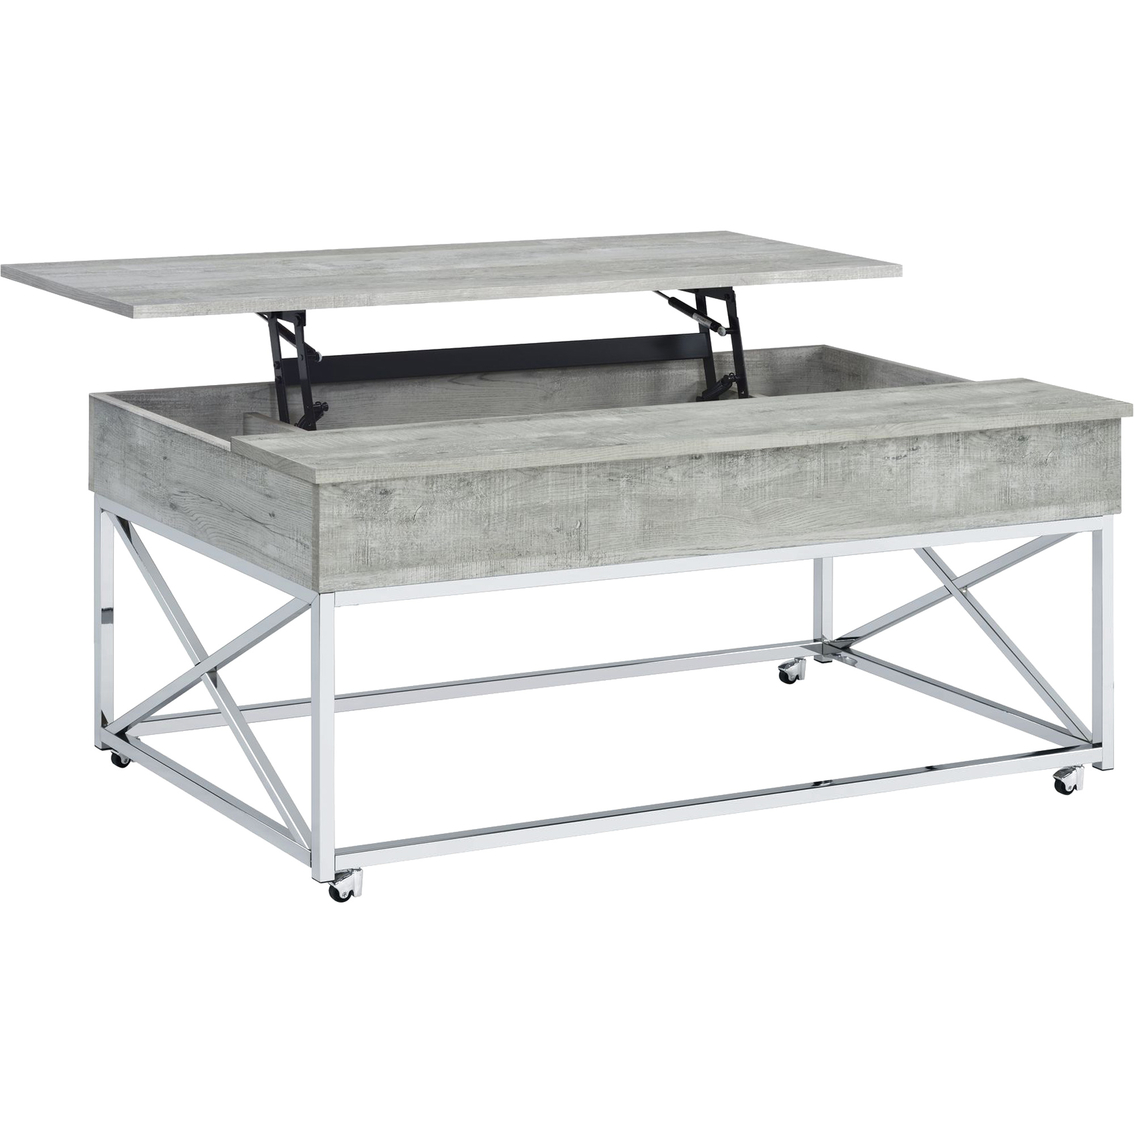 Elements Eliza Coffee Table with Lift Top and Casters - Image 4 of 10